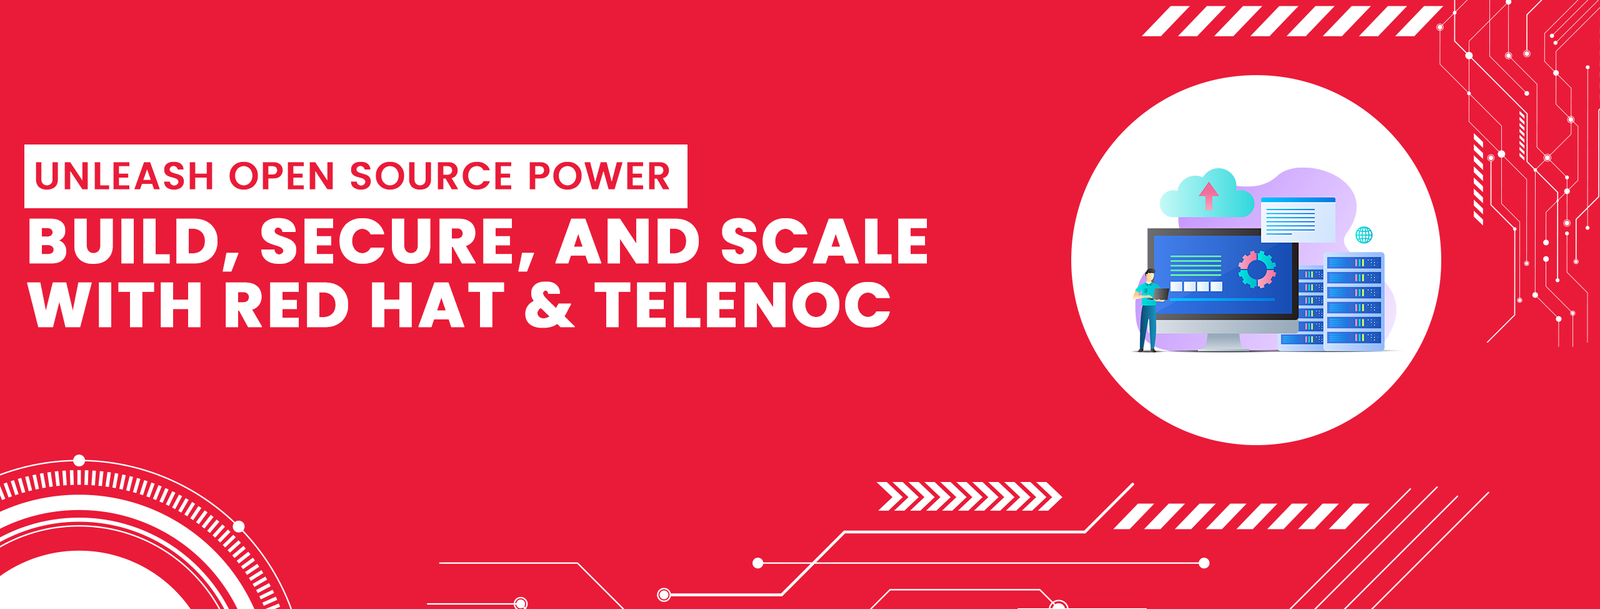 Telenoc is red hat partner in Saudi Arabia providing redhat openshift, rhel, red hat linux, red hat openshift, red hat enterprise linux, rhel 9, red hat enterprise linux 8, red hat enterprise linux 9, red hat edge and red hat kubernetes